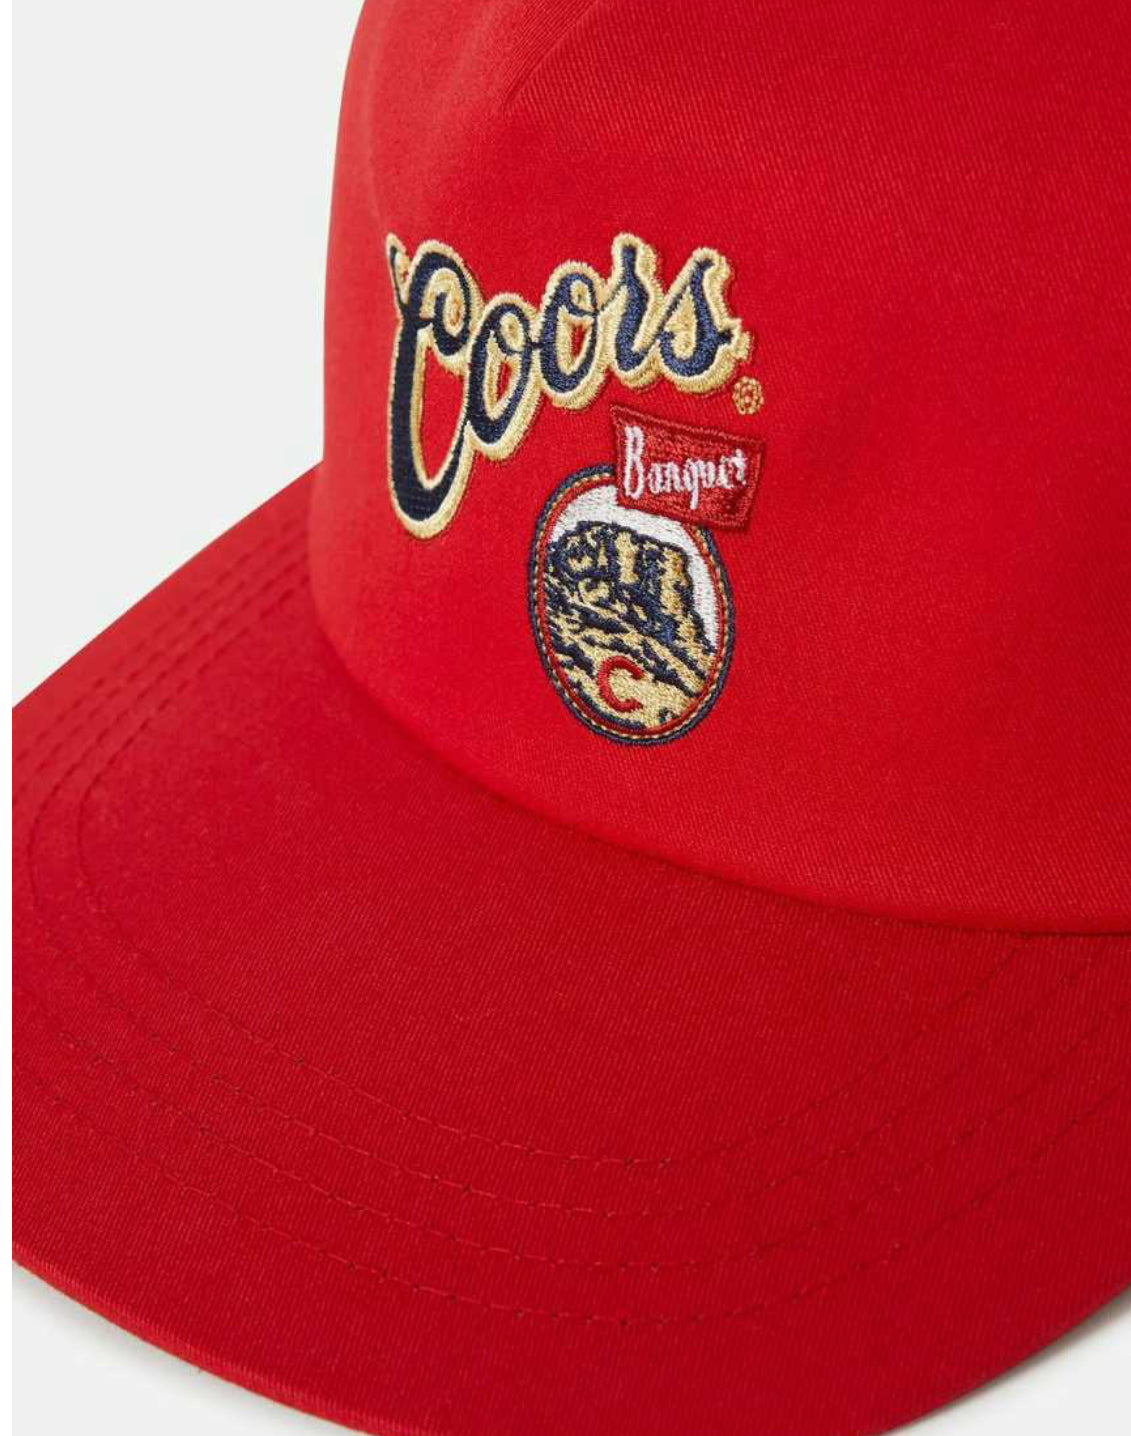 Coors SYL Banquet Snapback- Red